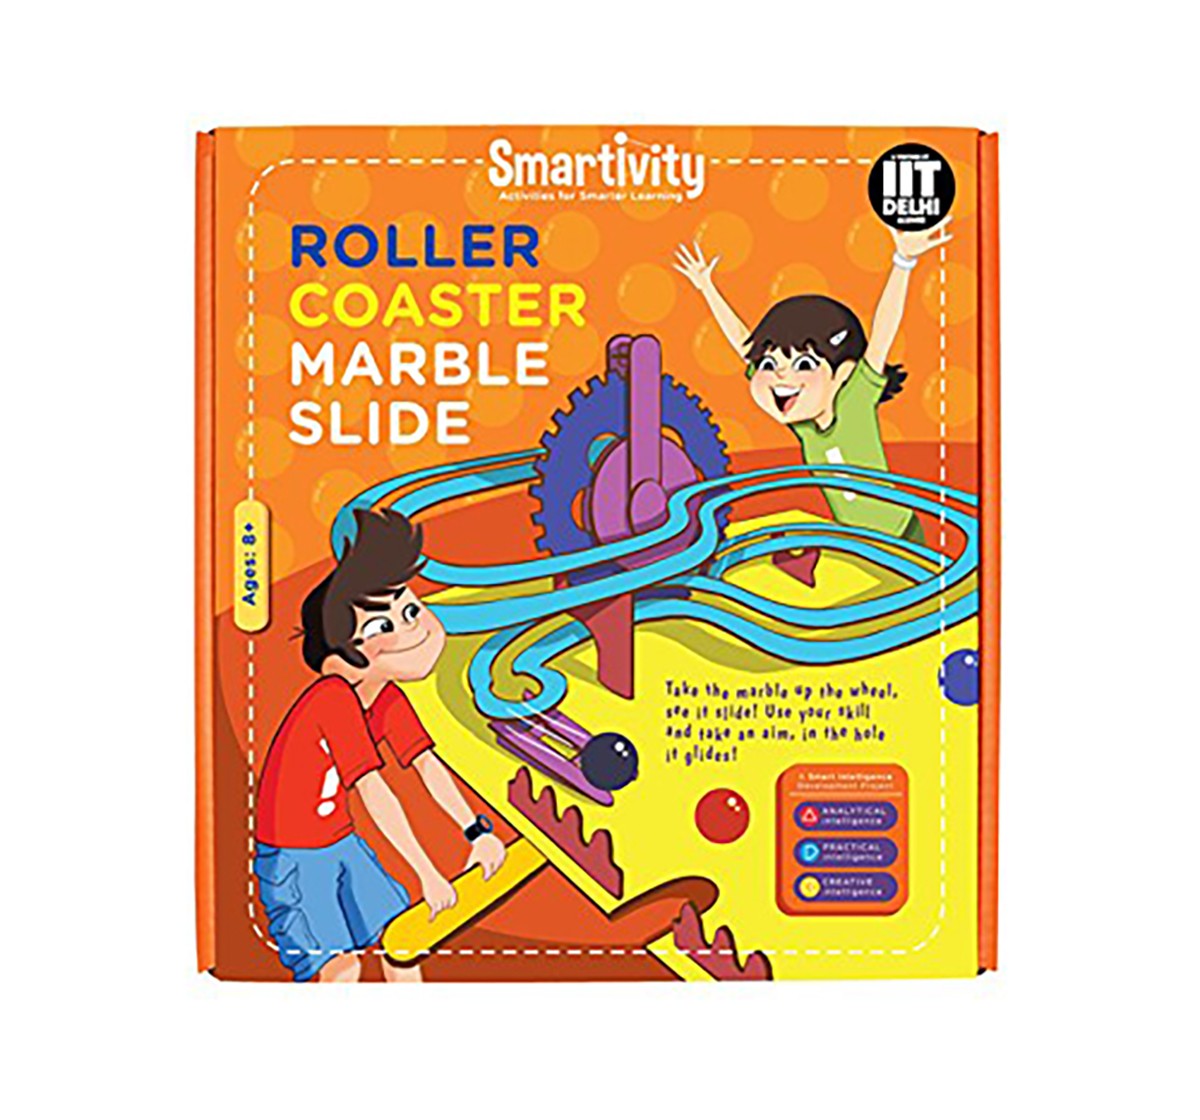 Smartivity Roller Coaster Marble Slide :  Stem, Learning, Educational and Construction Activity Toy Gift for Kids age 6Y+ (Multi-Color)